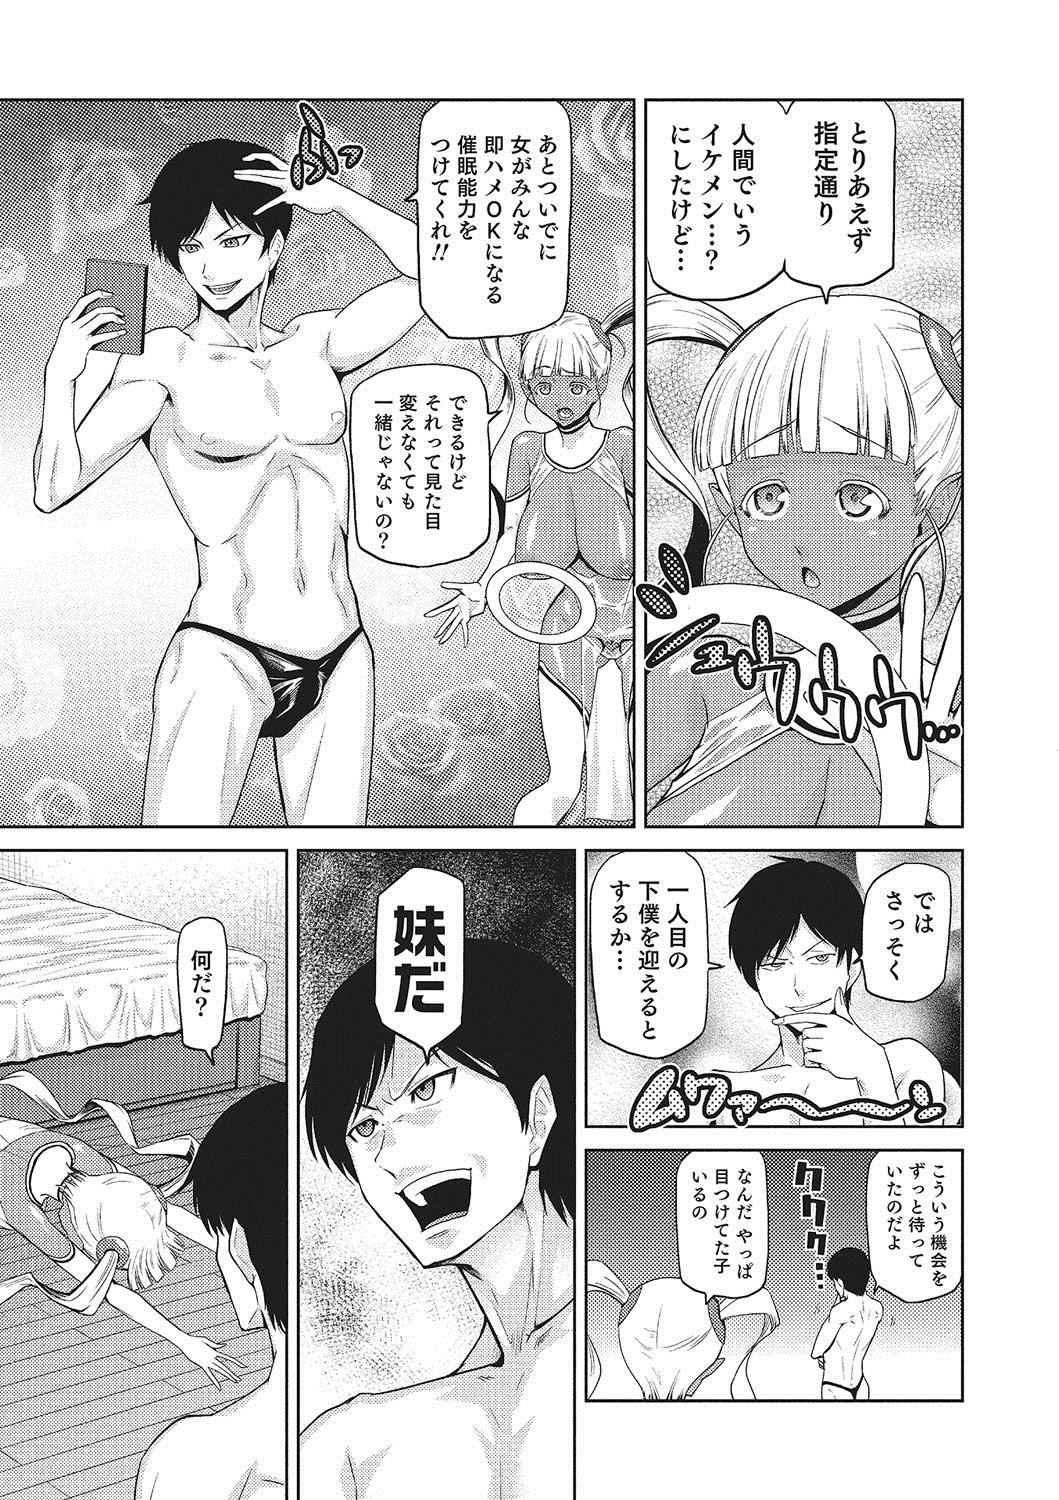 Chacal Megami no Saien Ass Licking - Page 12